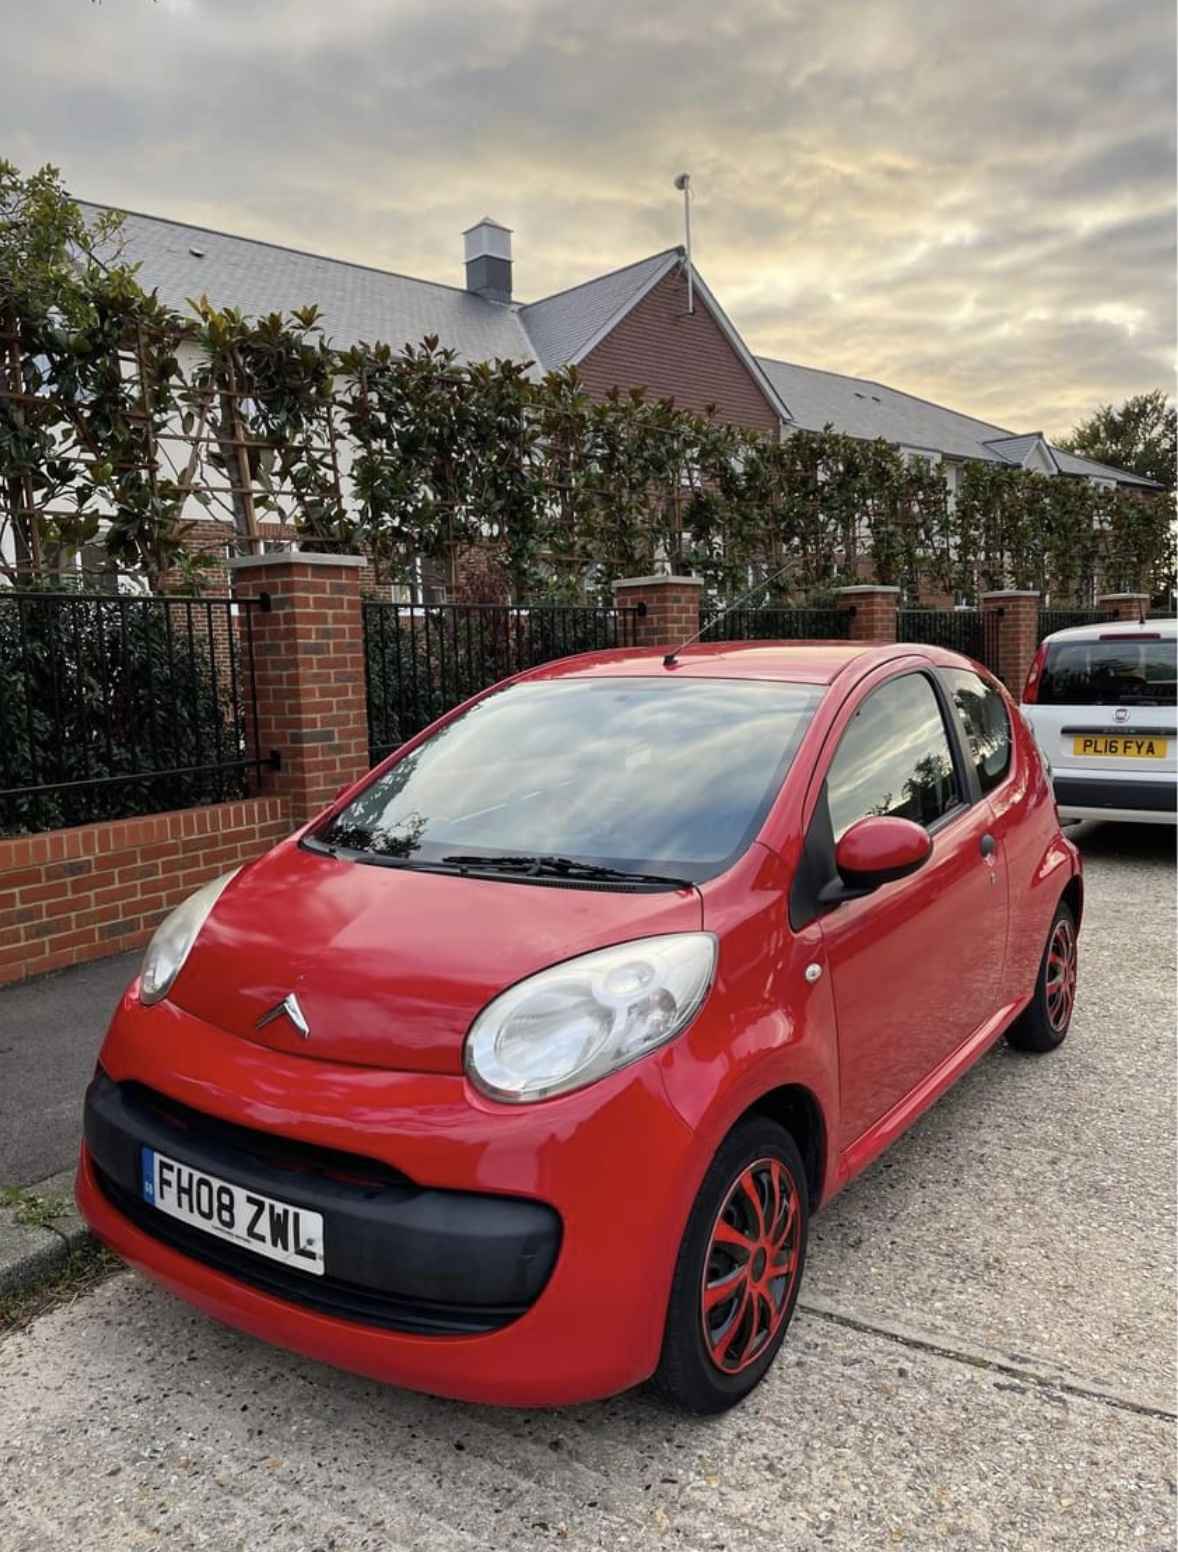 Photograph of FH08 ZWL - a Red Citroen C1 parked in Hollingdean by a non-resident and stored here whilst a dodgy car dealer attempts to sell it. The fifth of five photographs supplied by the residents of Hollingdean.